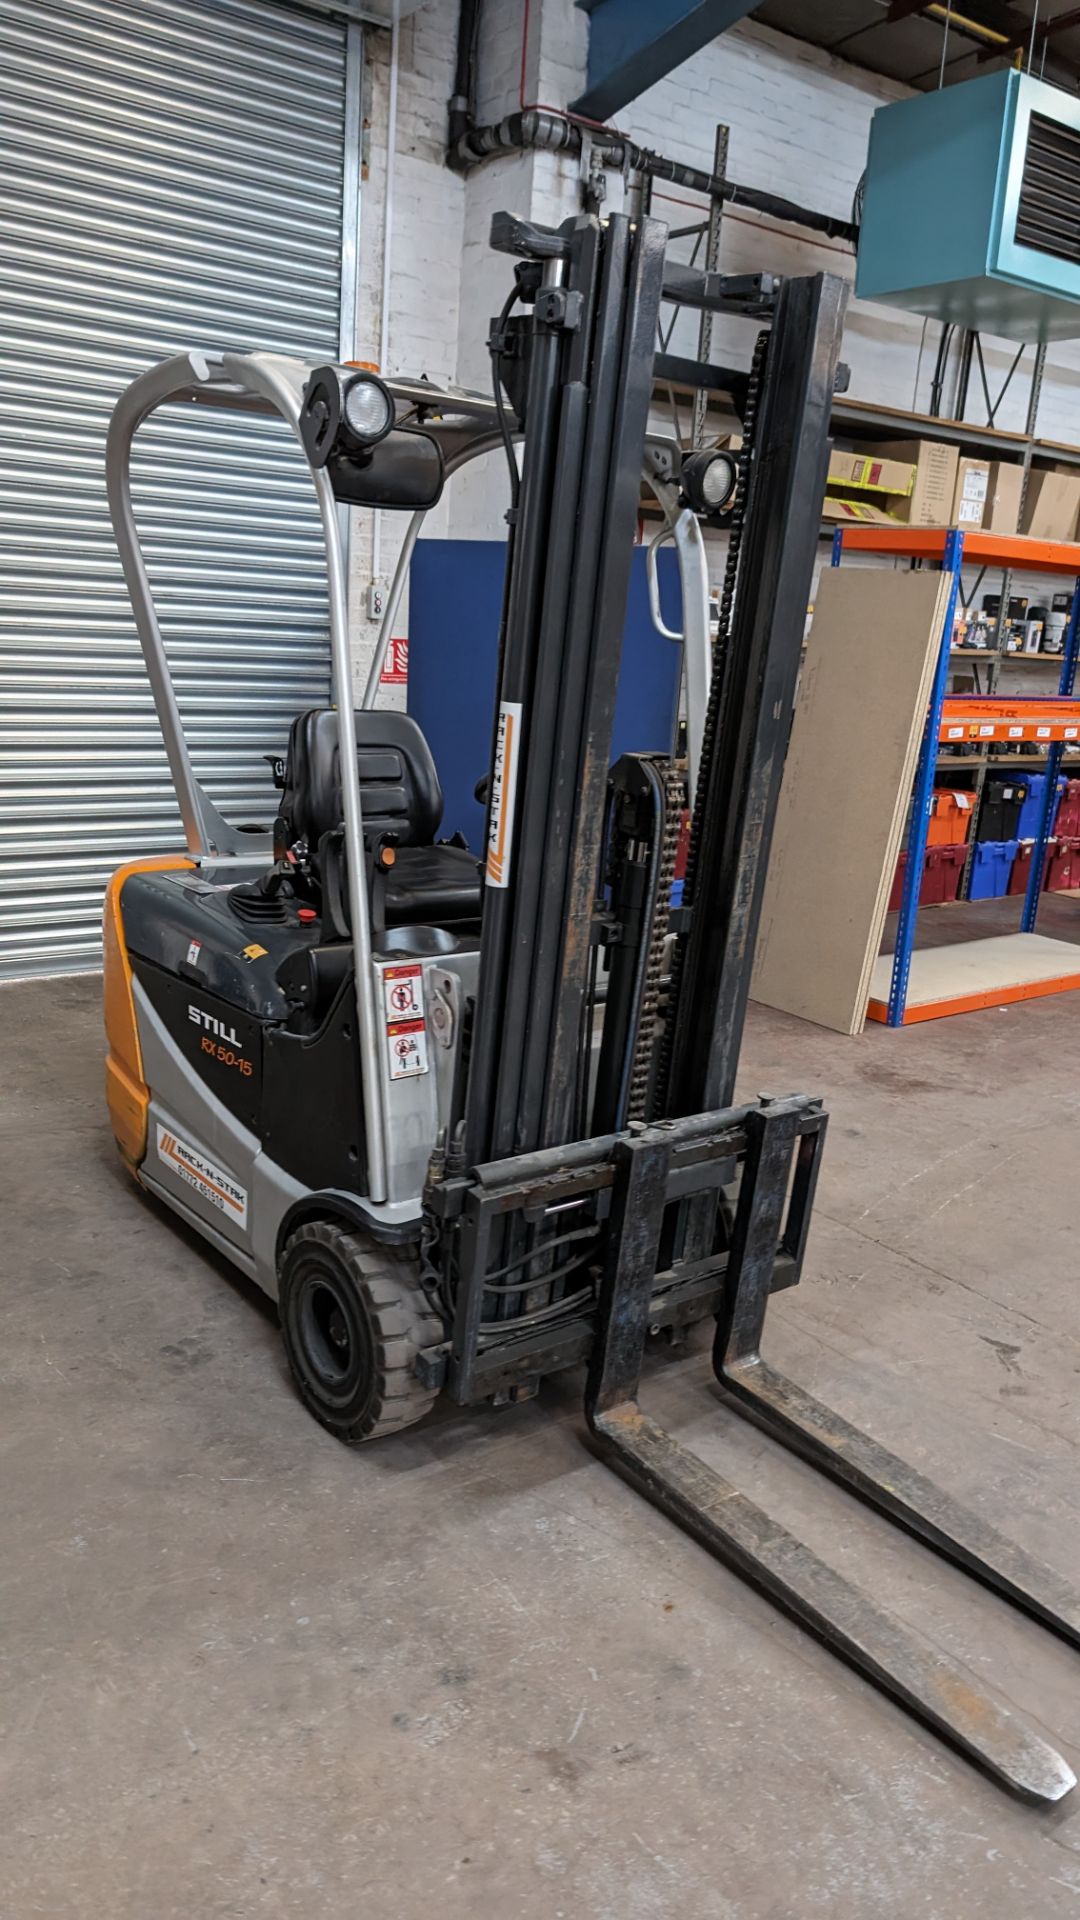 Still model RX-5015 3-wheel electric forklift truck with sideshift, 1.5 tonne capacity, including St - Image 12 of 18